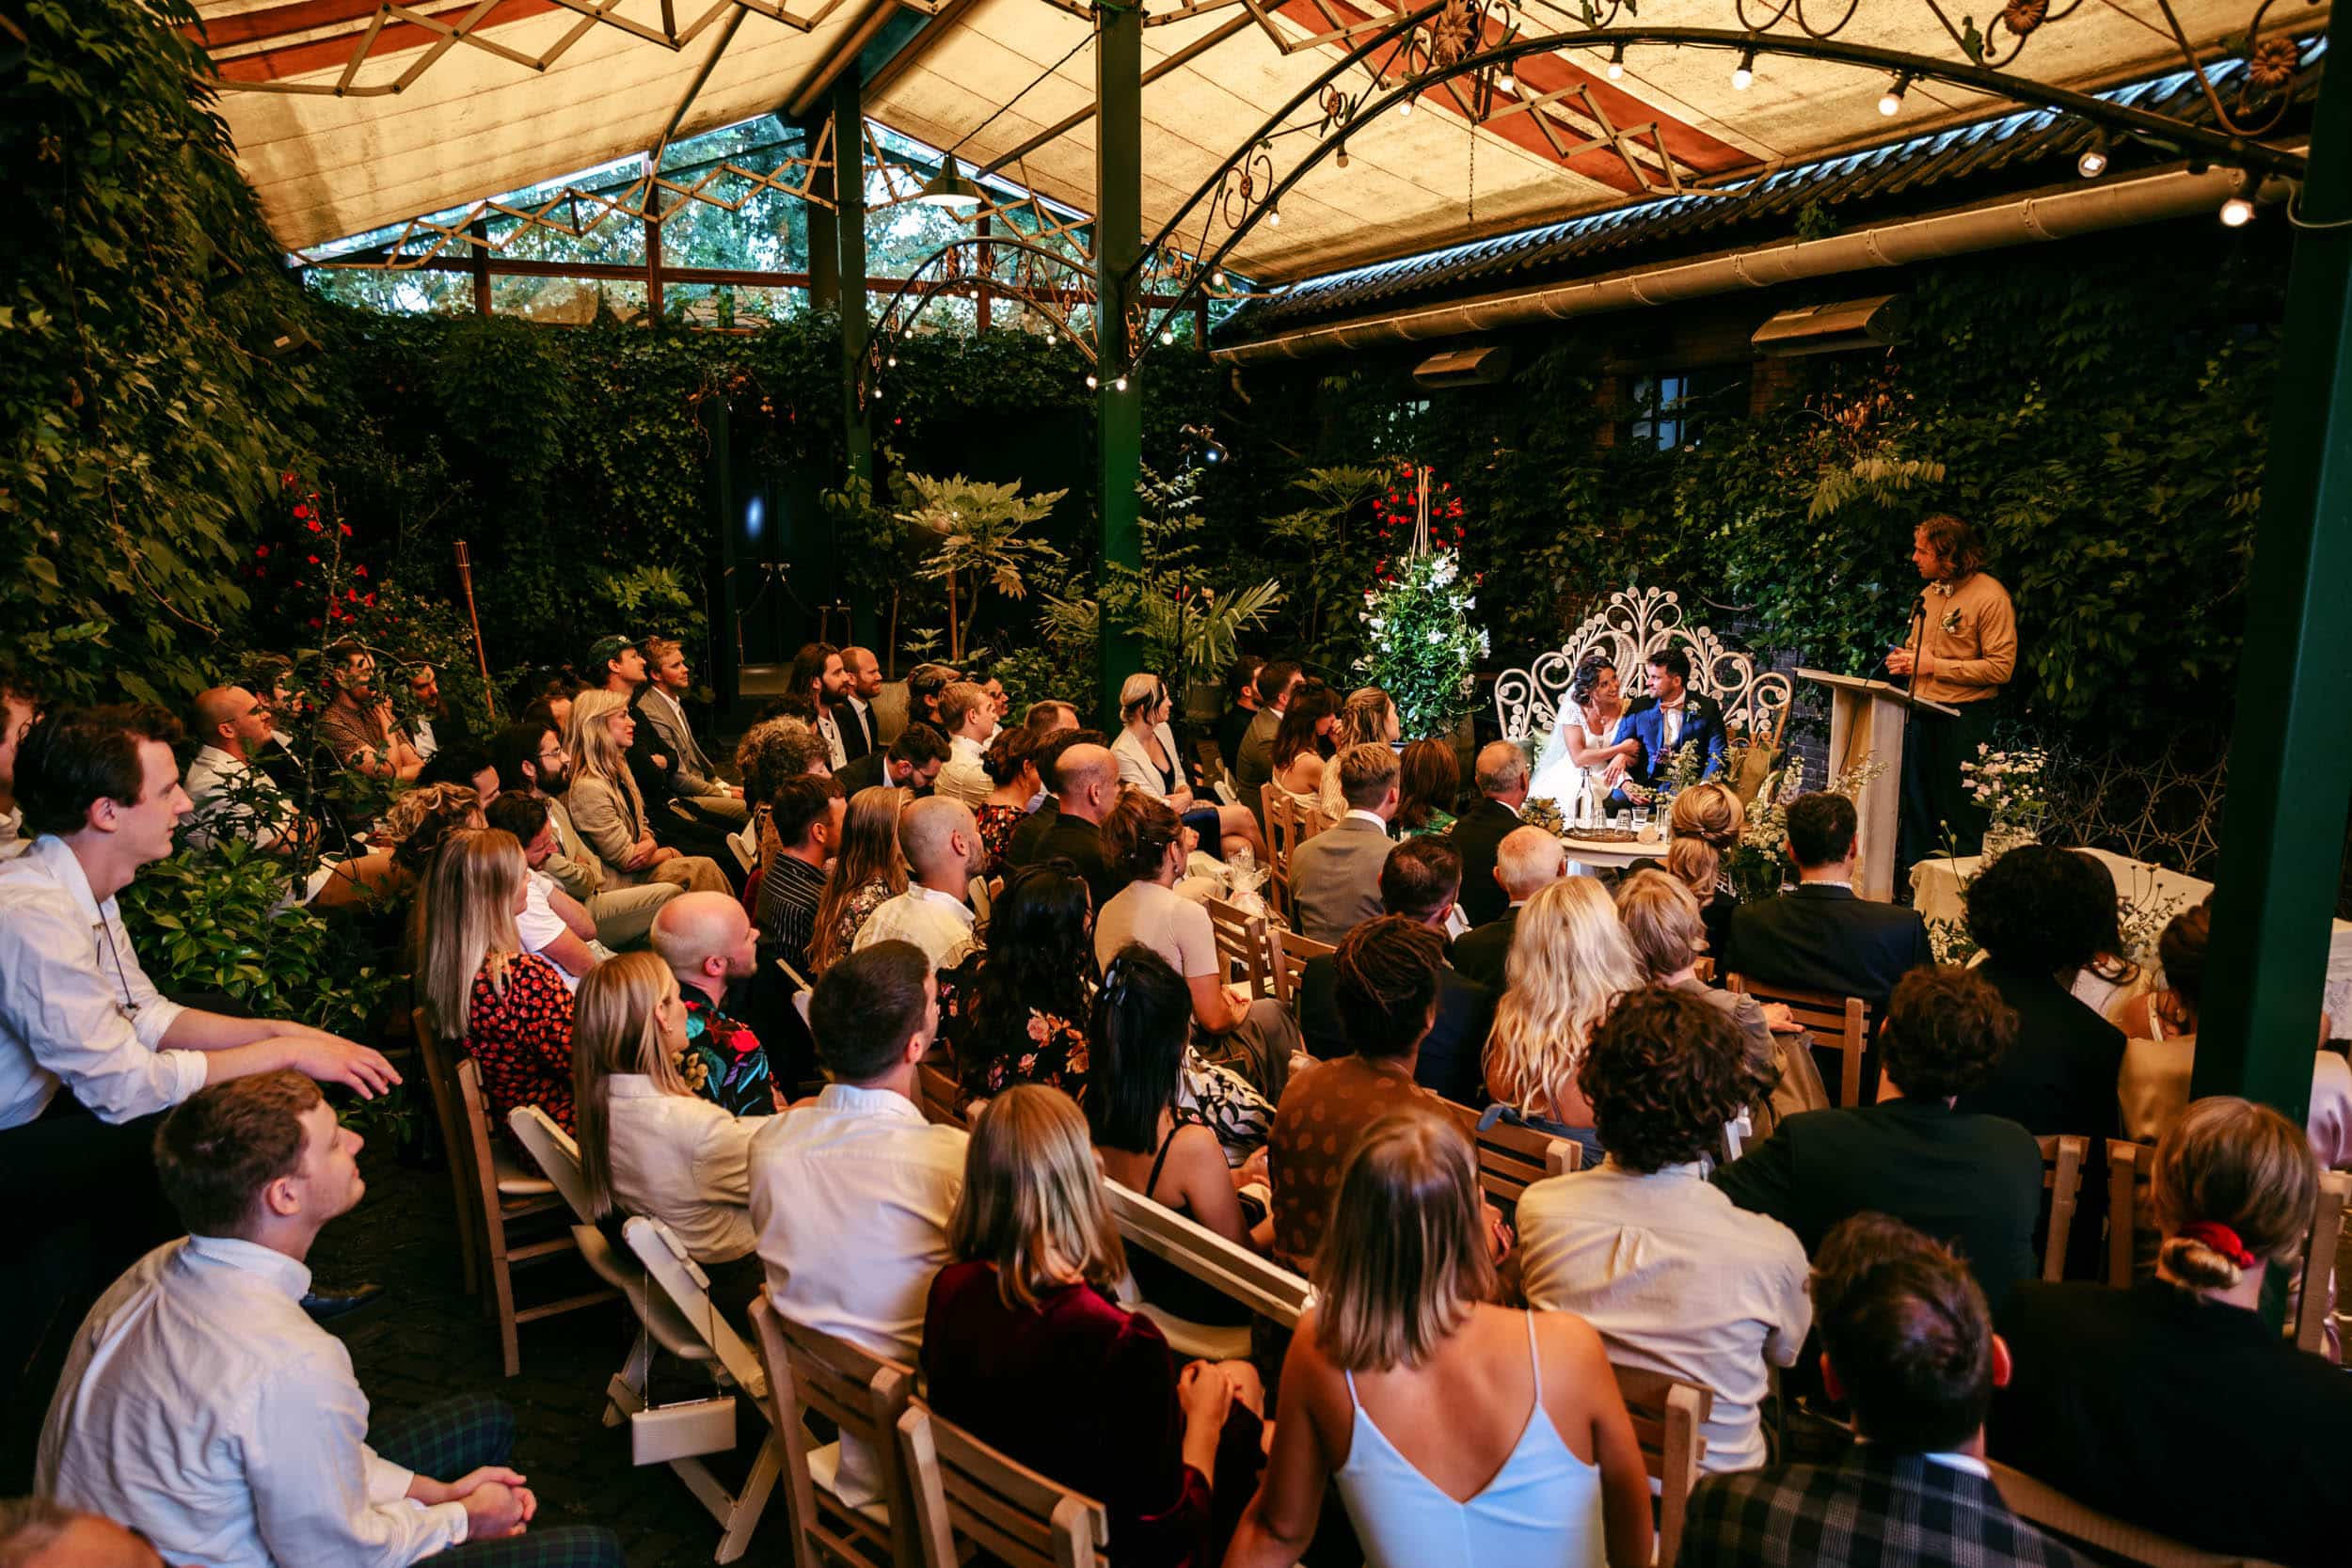 A wedding ceremony in a greenhouse.